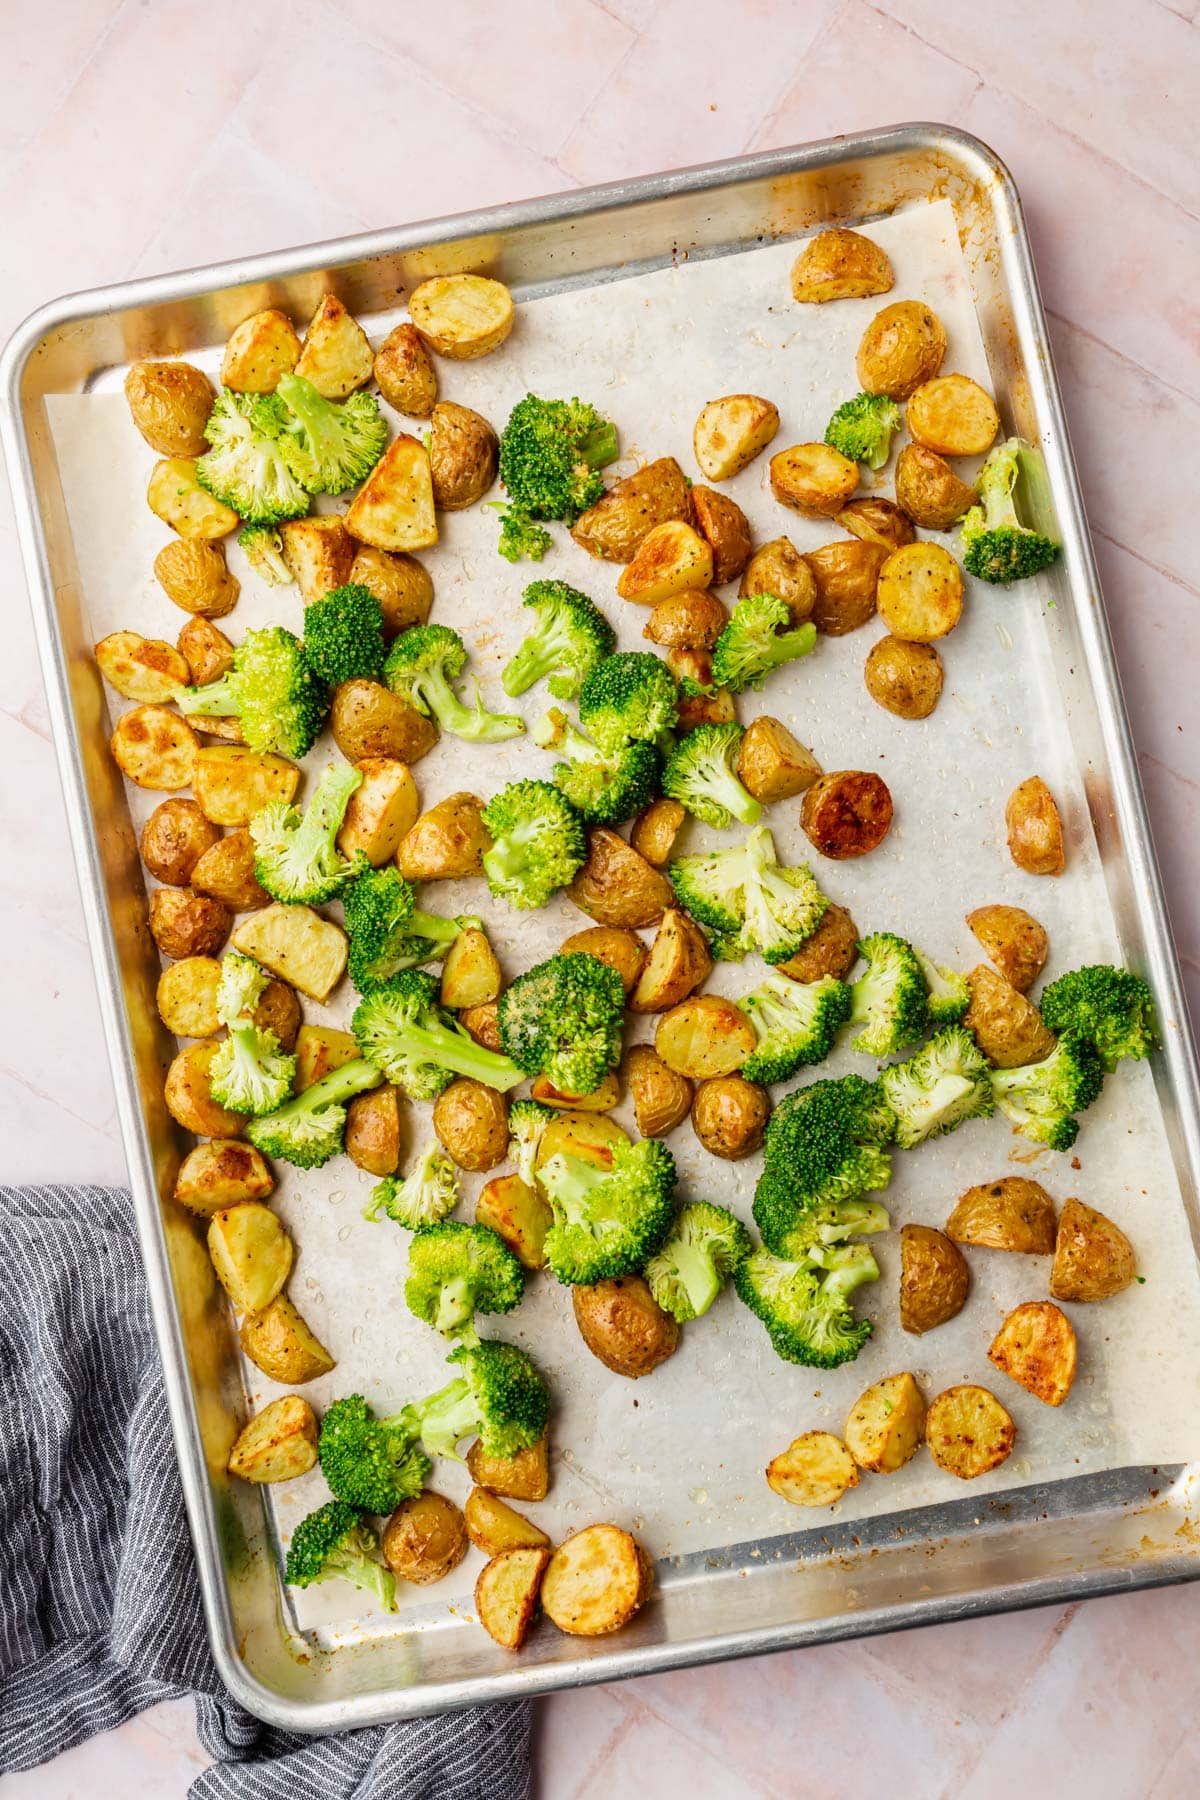 An overhead view of baby potatoes and broccoli on a baking sheet tossed together before baking.